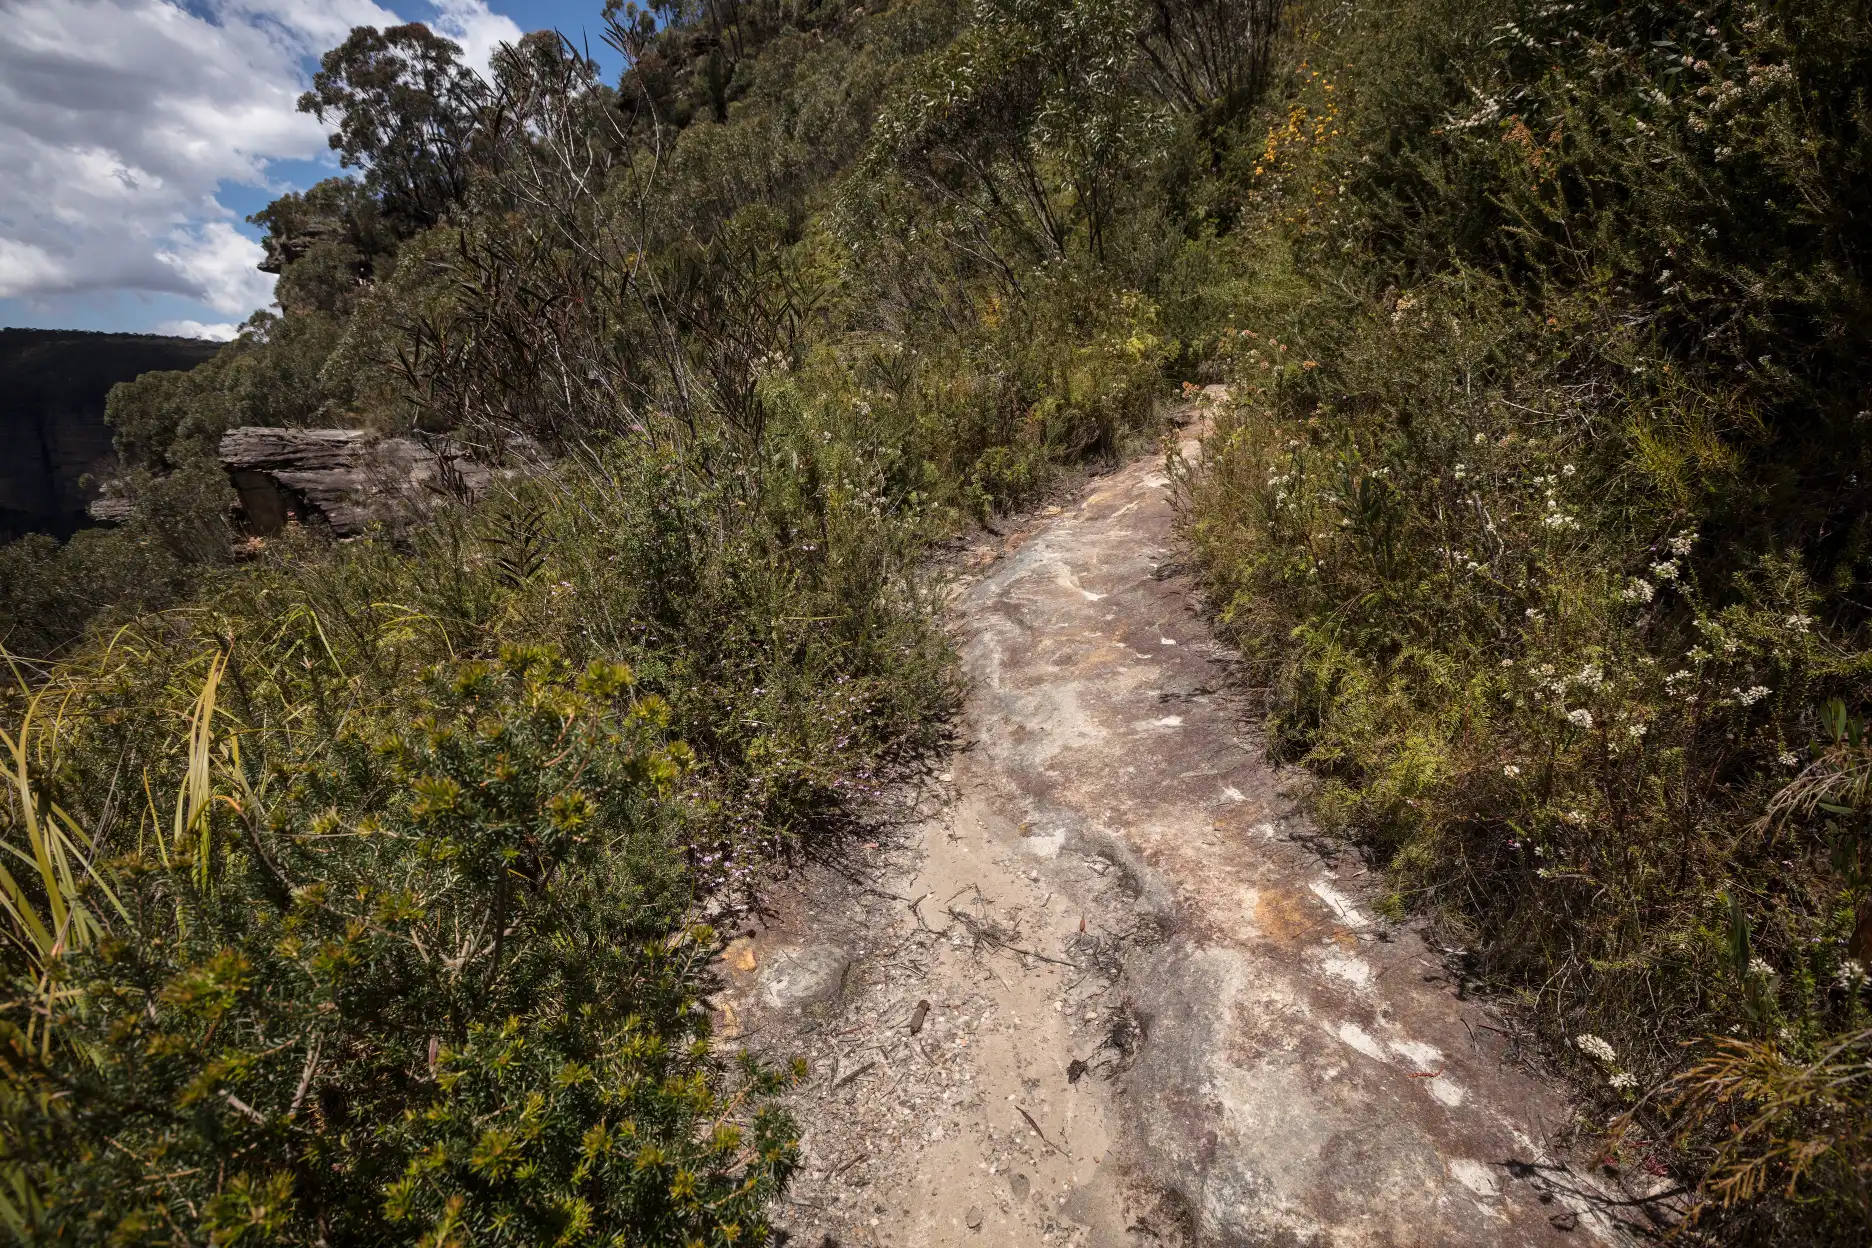 Trail section between Govett’s Leap and Horseshoe Falls